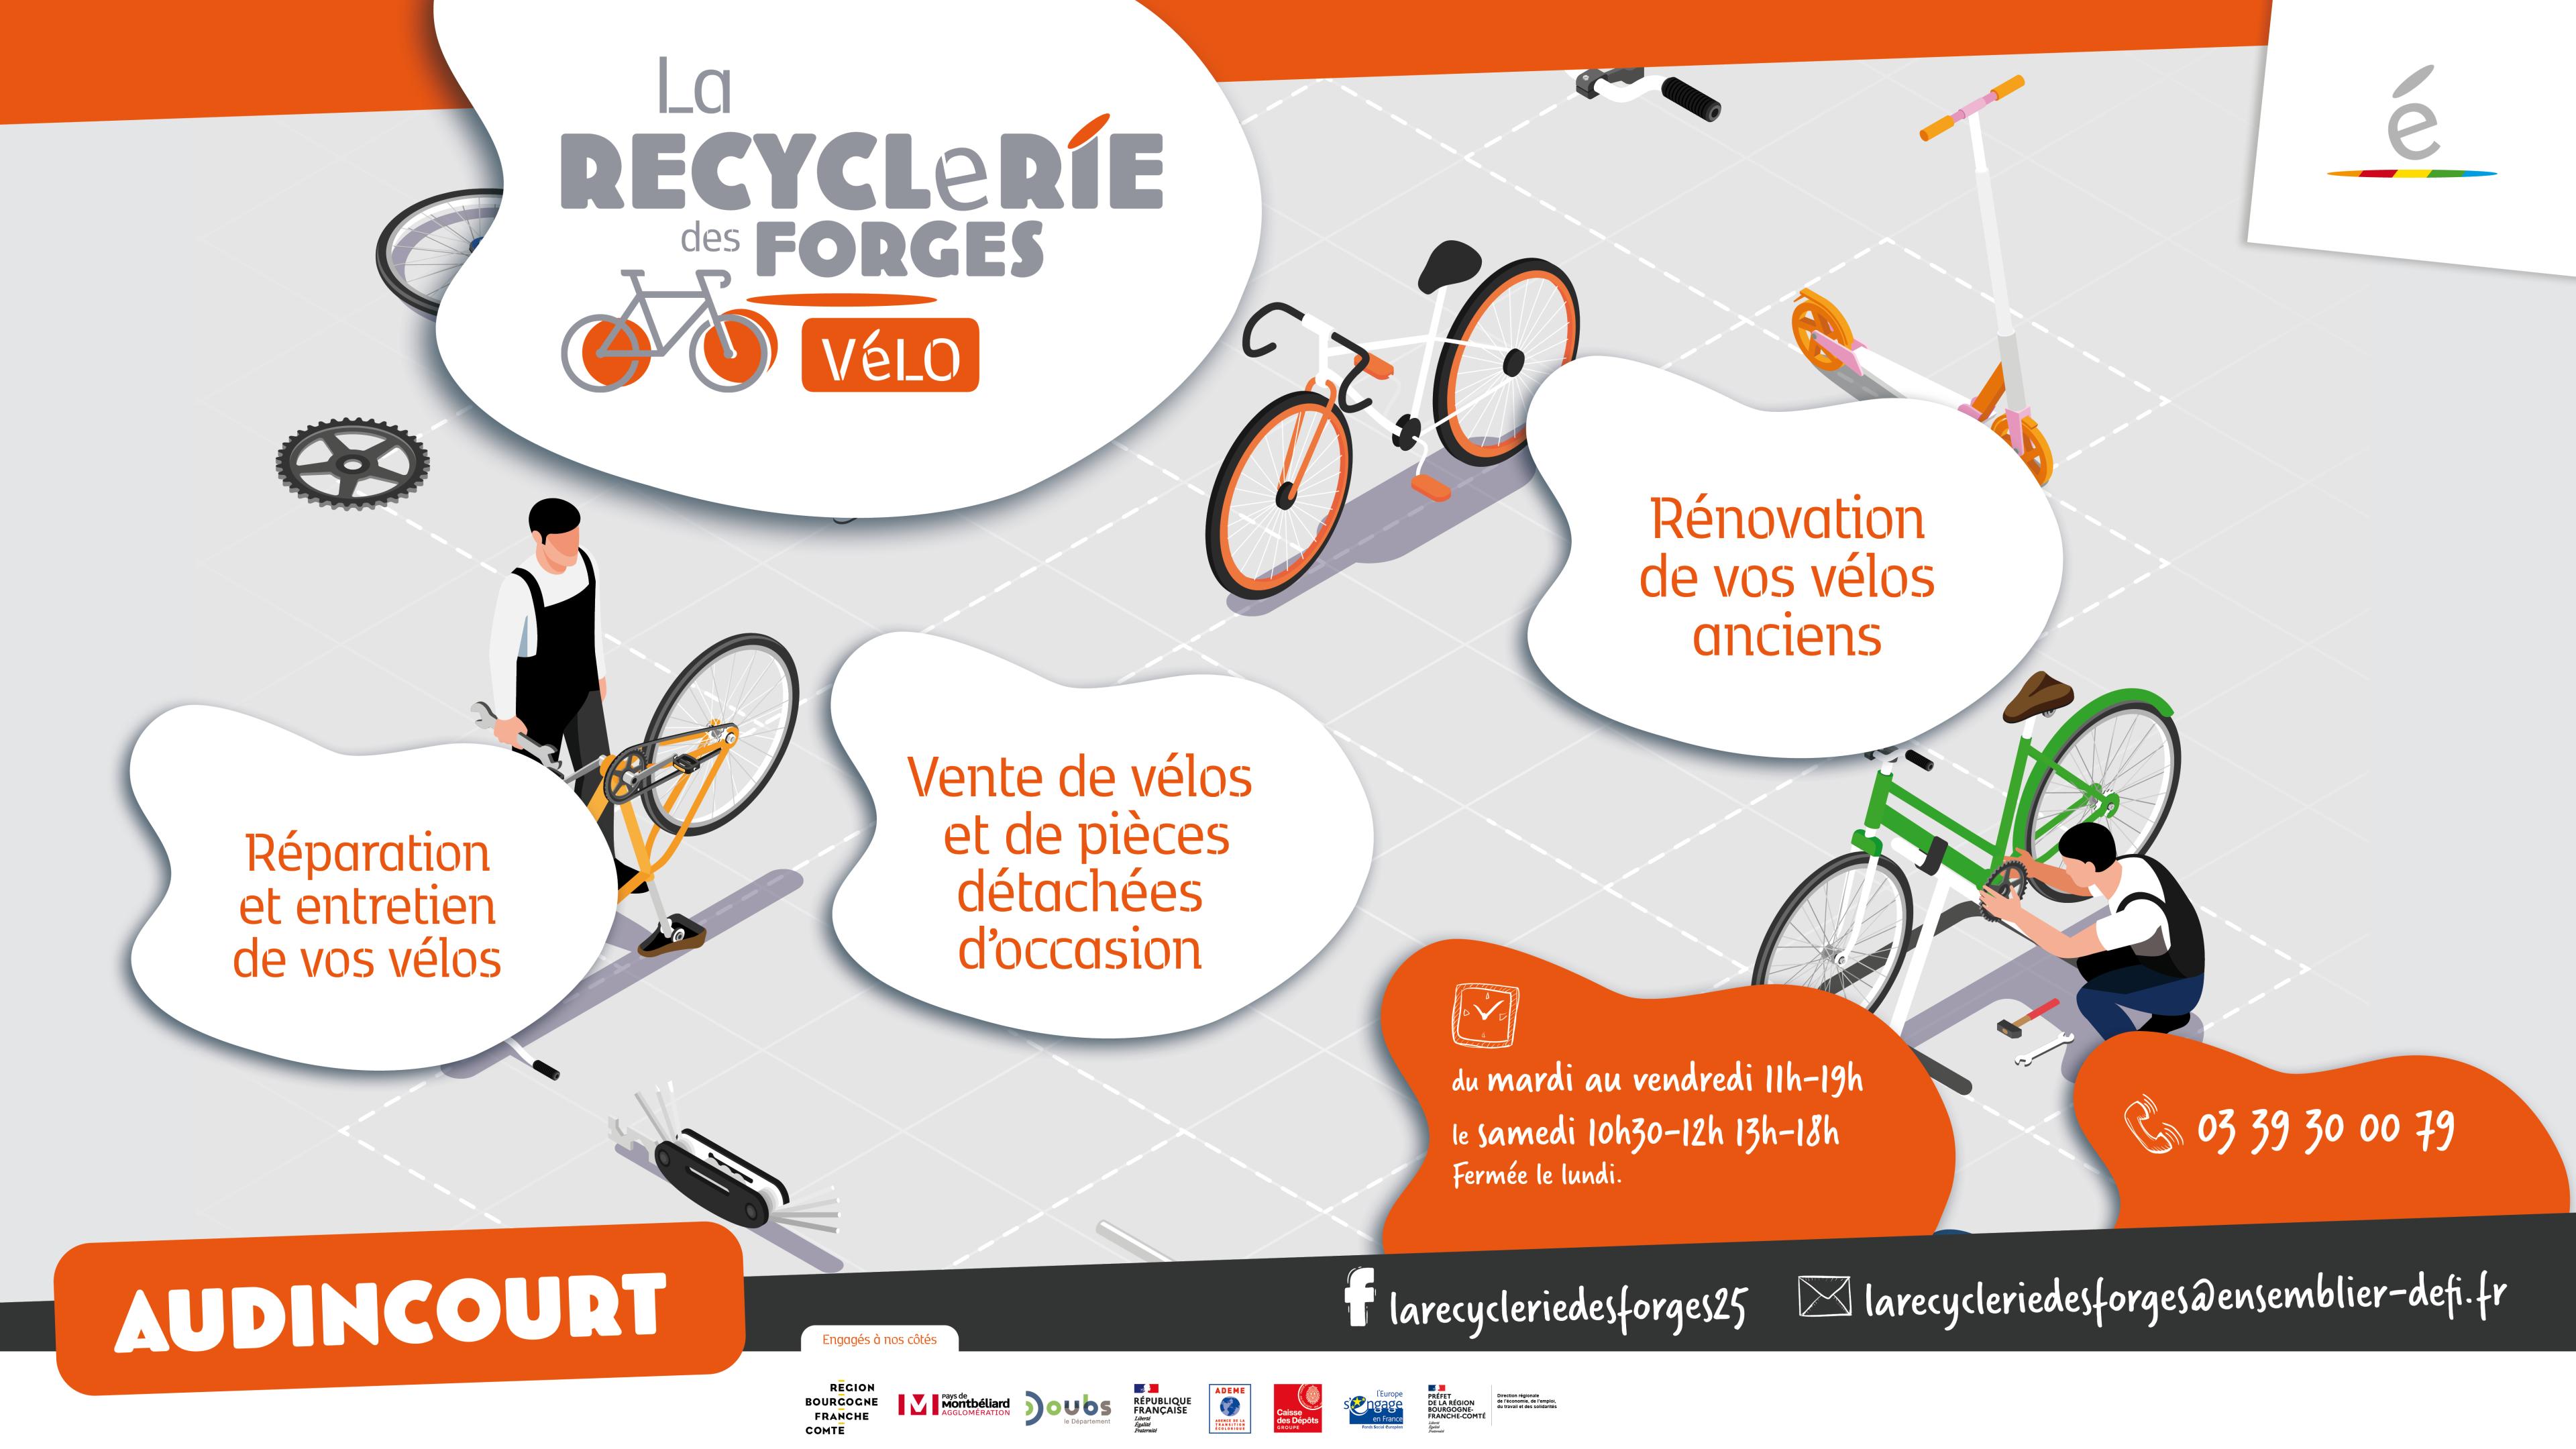 Recyclerie des Forges